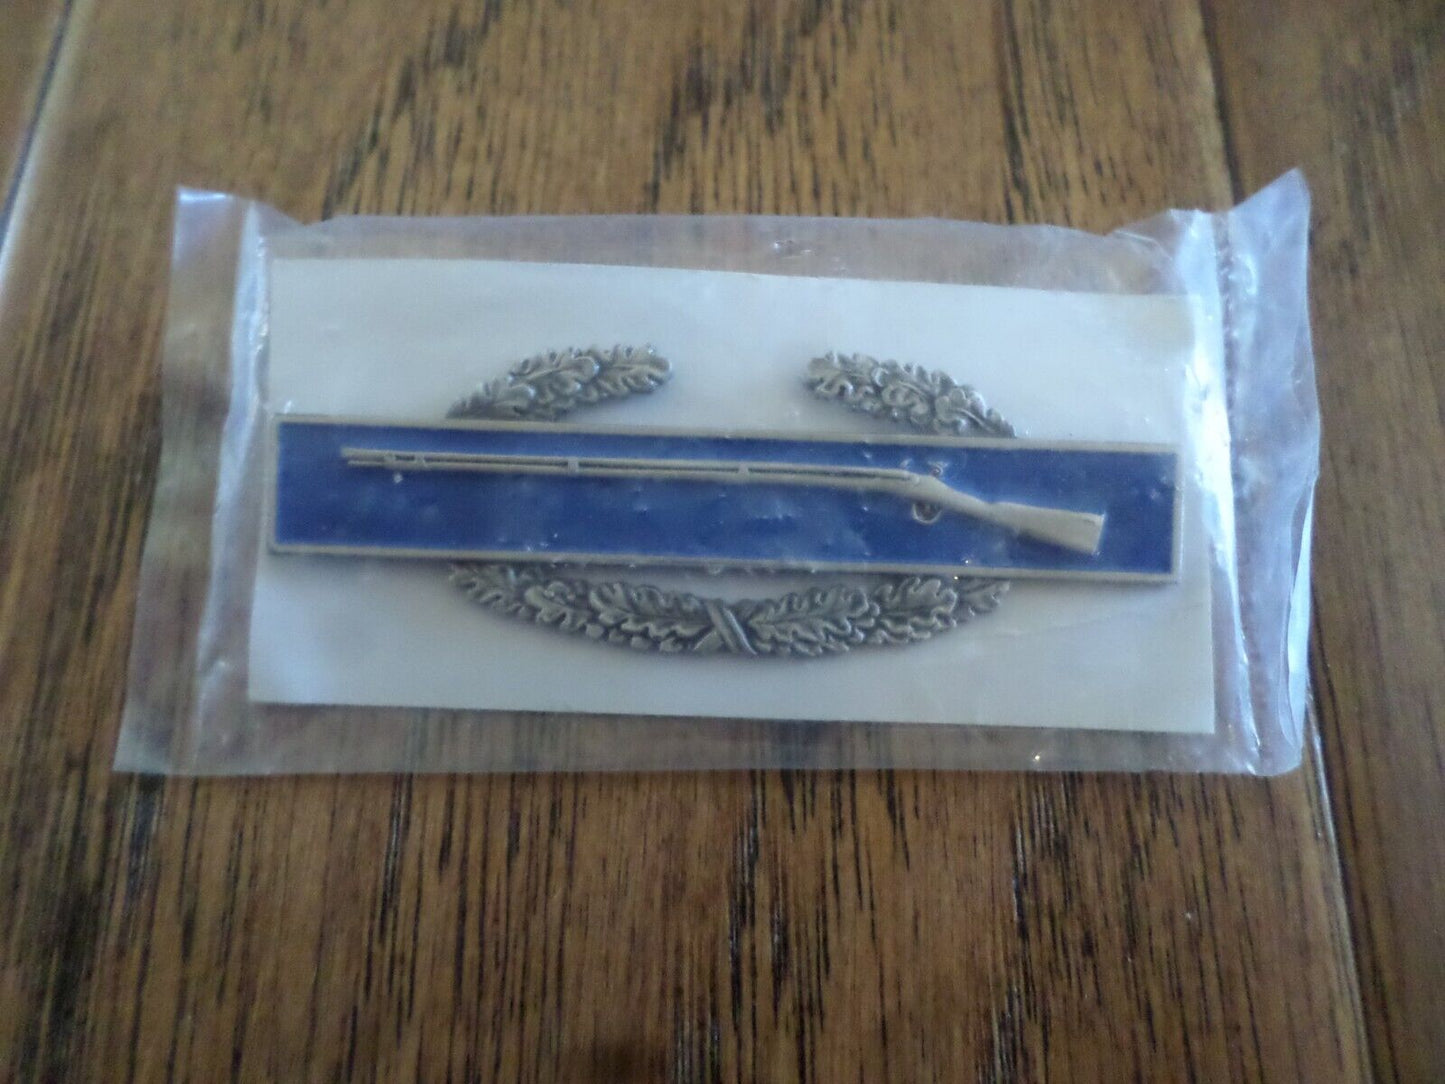 U.S MILITARY ISSUE ARMY CIB FIRST AWARD COMBAT INFANTRY BADGE USA MADE